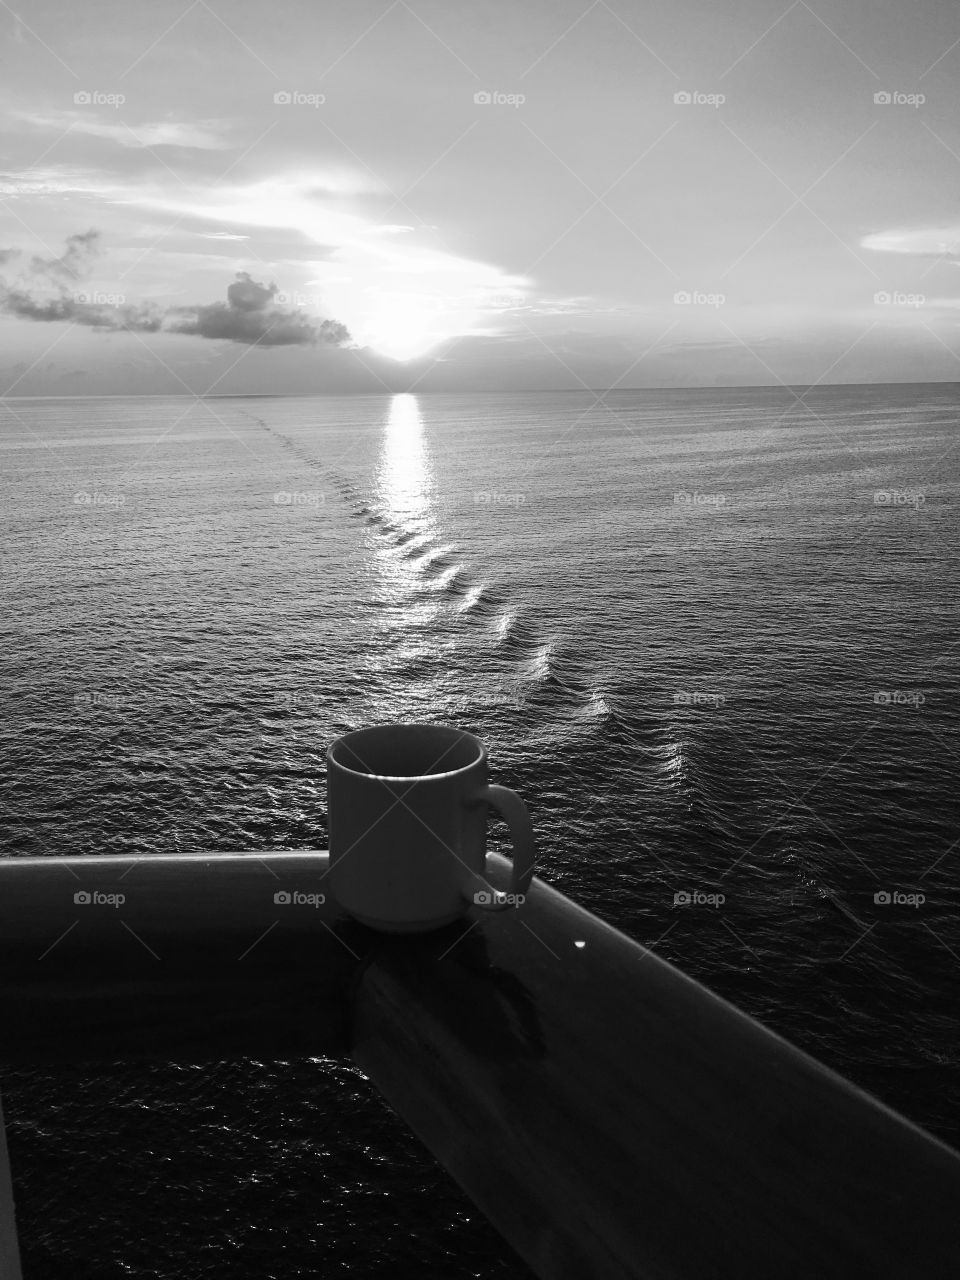 Nothing better than morning coffee and a beautiful sunrise somewhere in the North Atlantic Ocean.